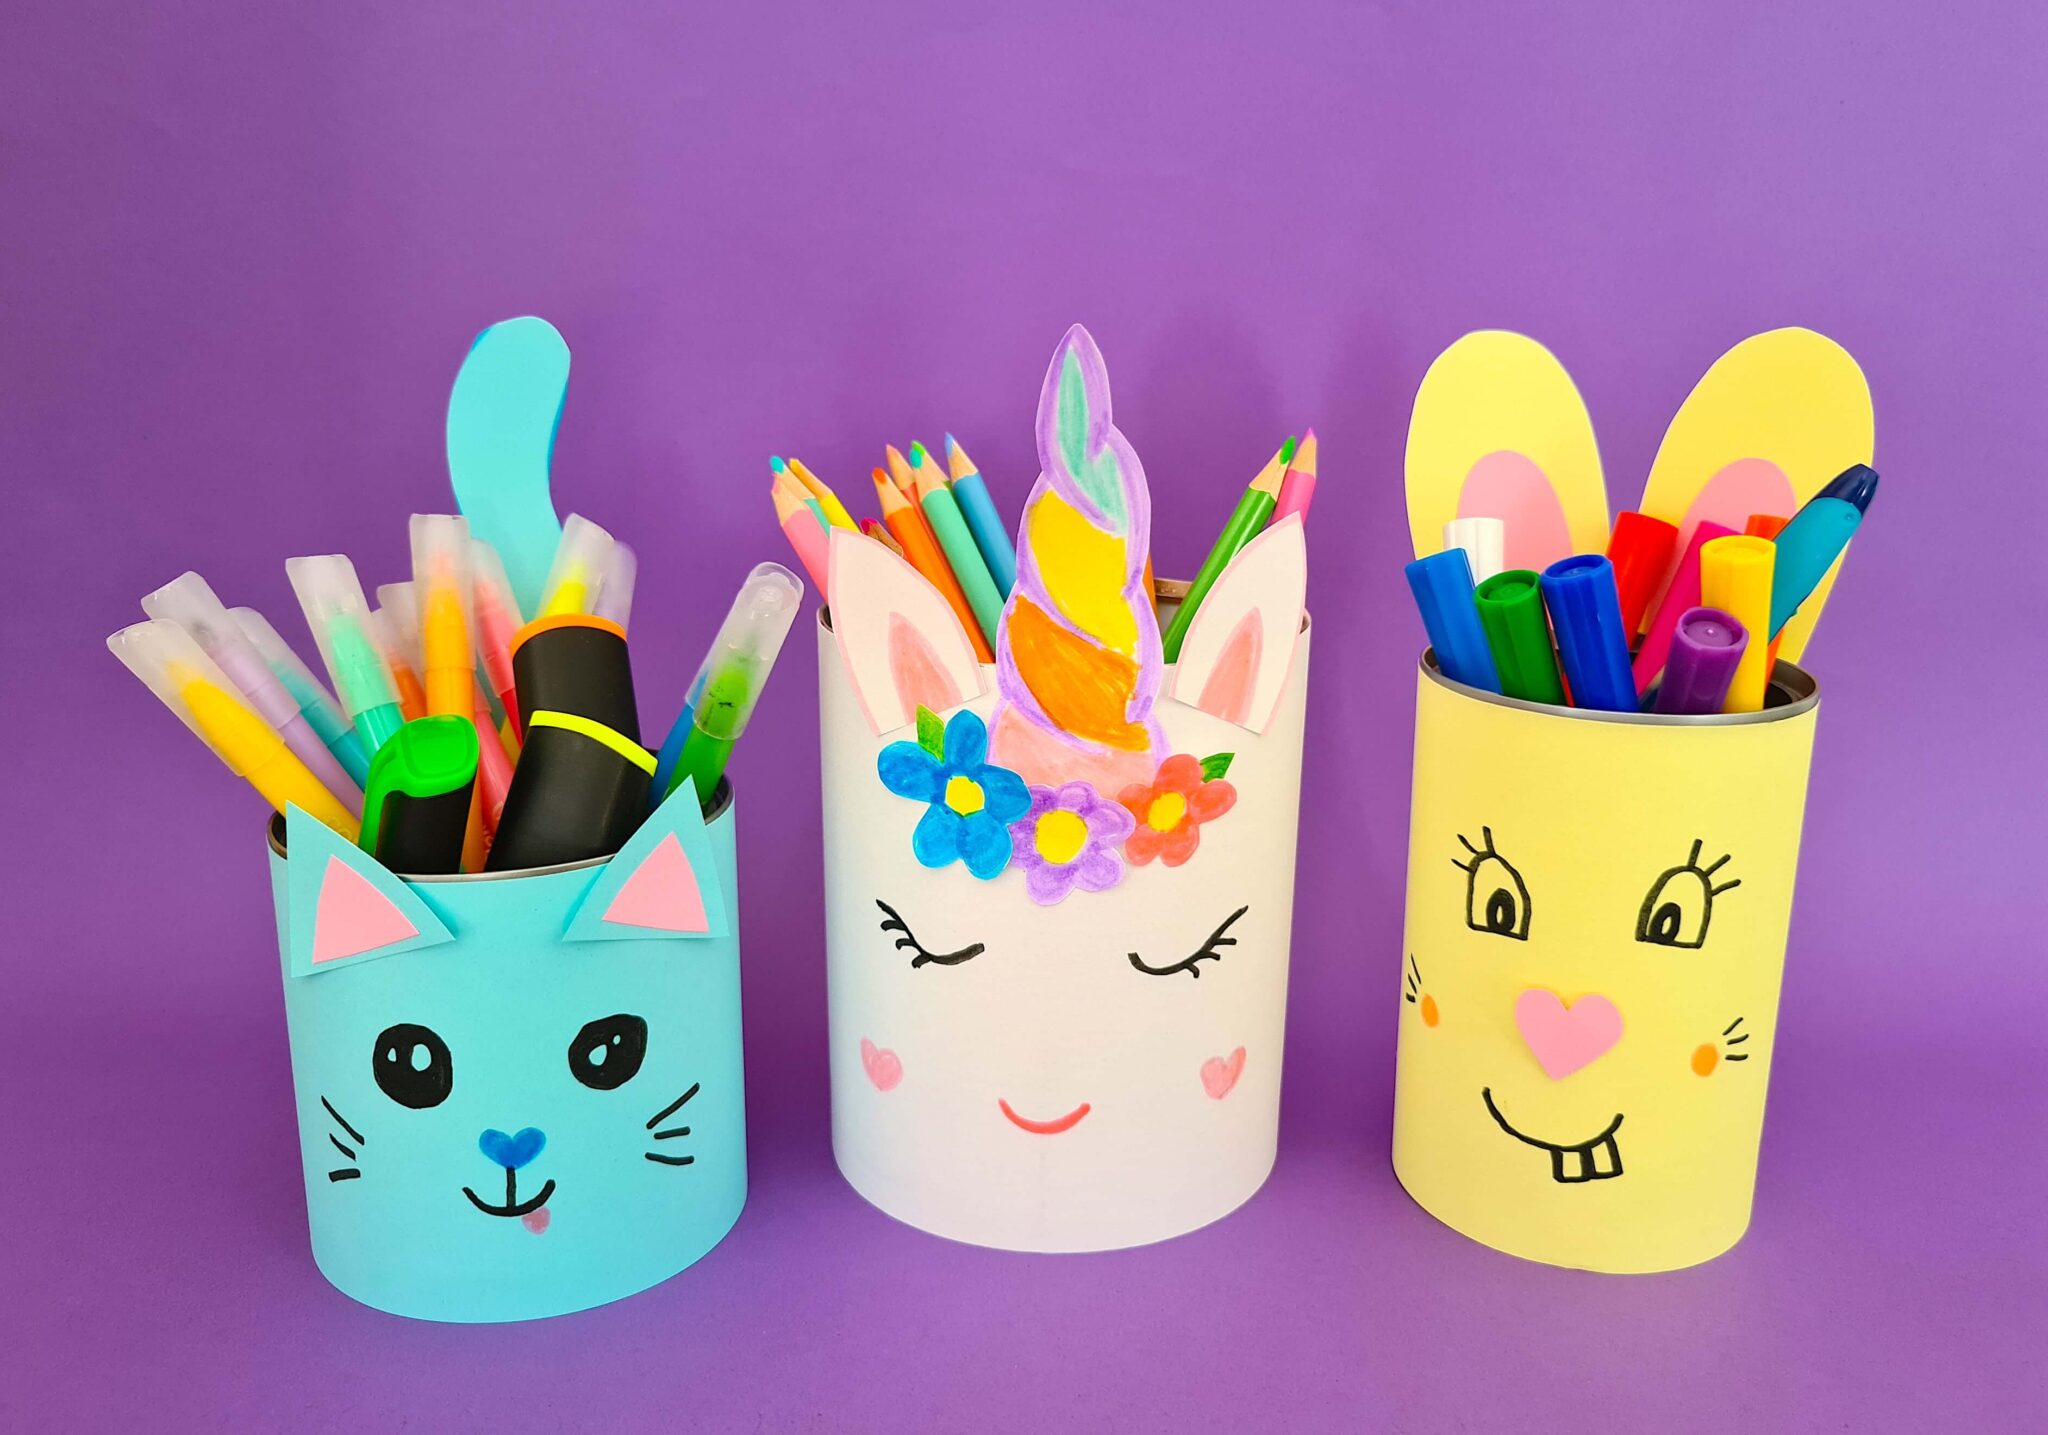 https://mapiwee.com/wp-content/uploads/2023/09/mapiwee-by-maped-fabriquer-un-pot-a-crayons-chat-bricolage-enfant-12-scaled.jpg